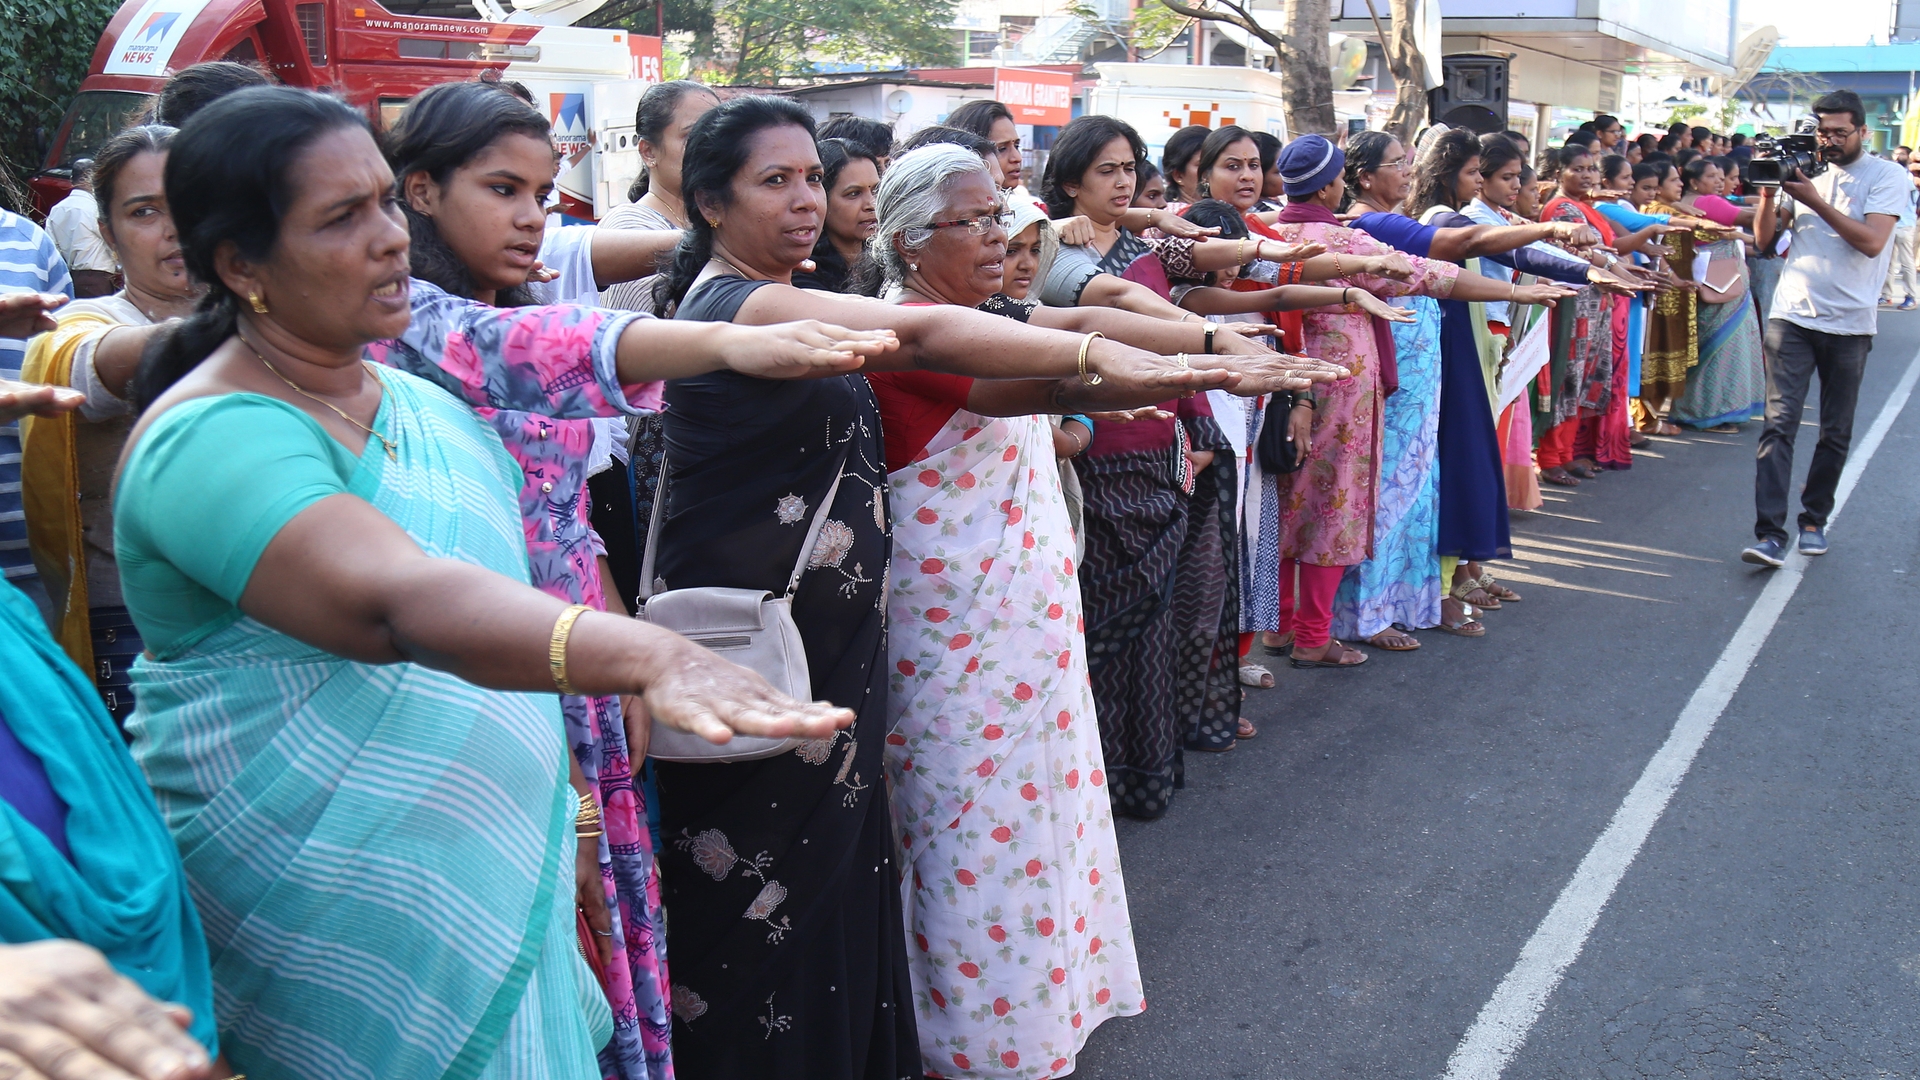 INDIA SOCIETY PROTEST FOR GENDER EQUALITY